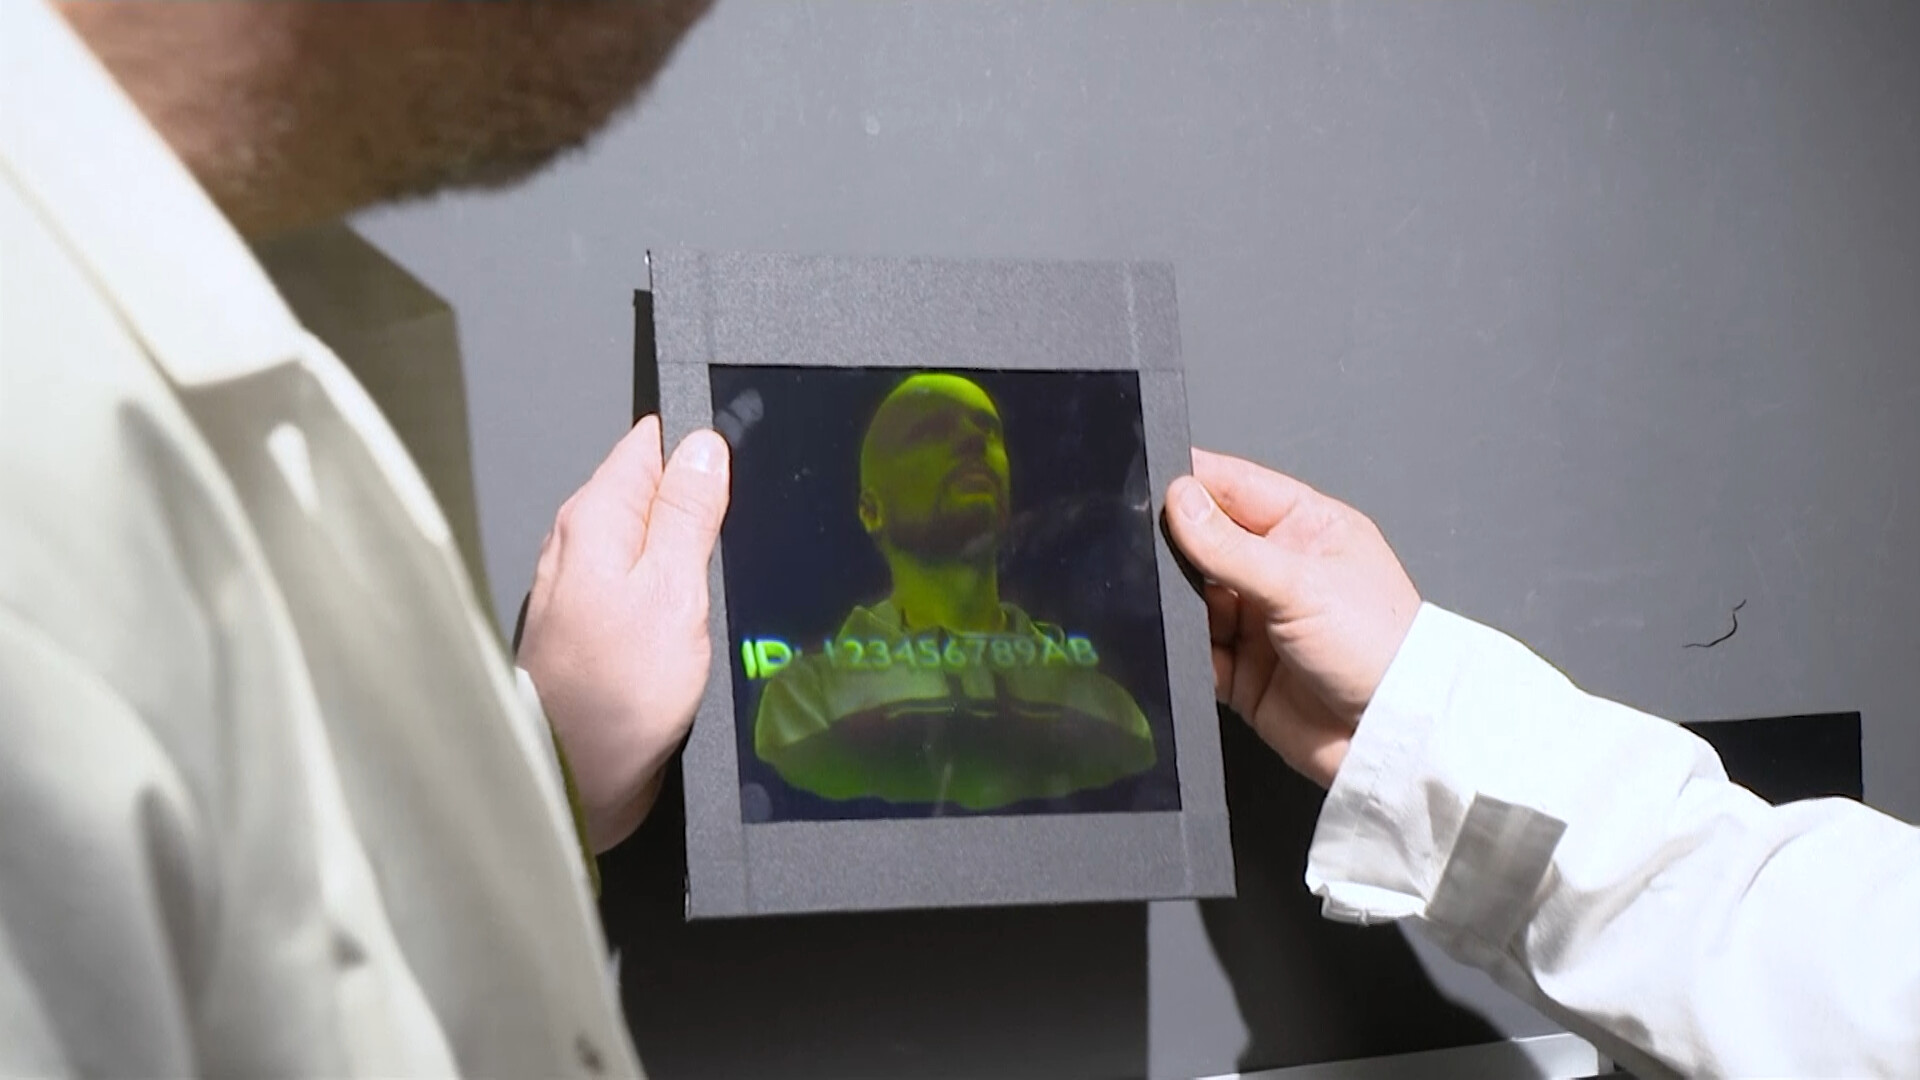 Researchers holding a holographic image